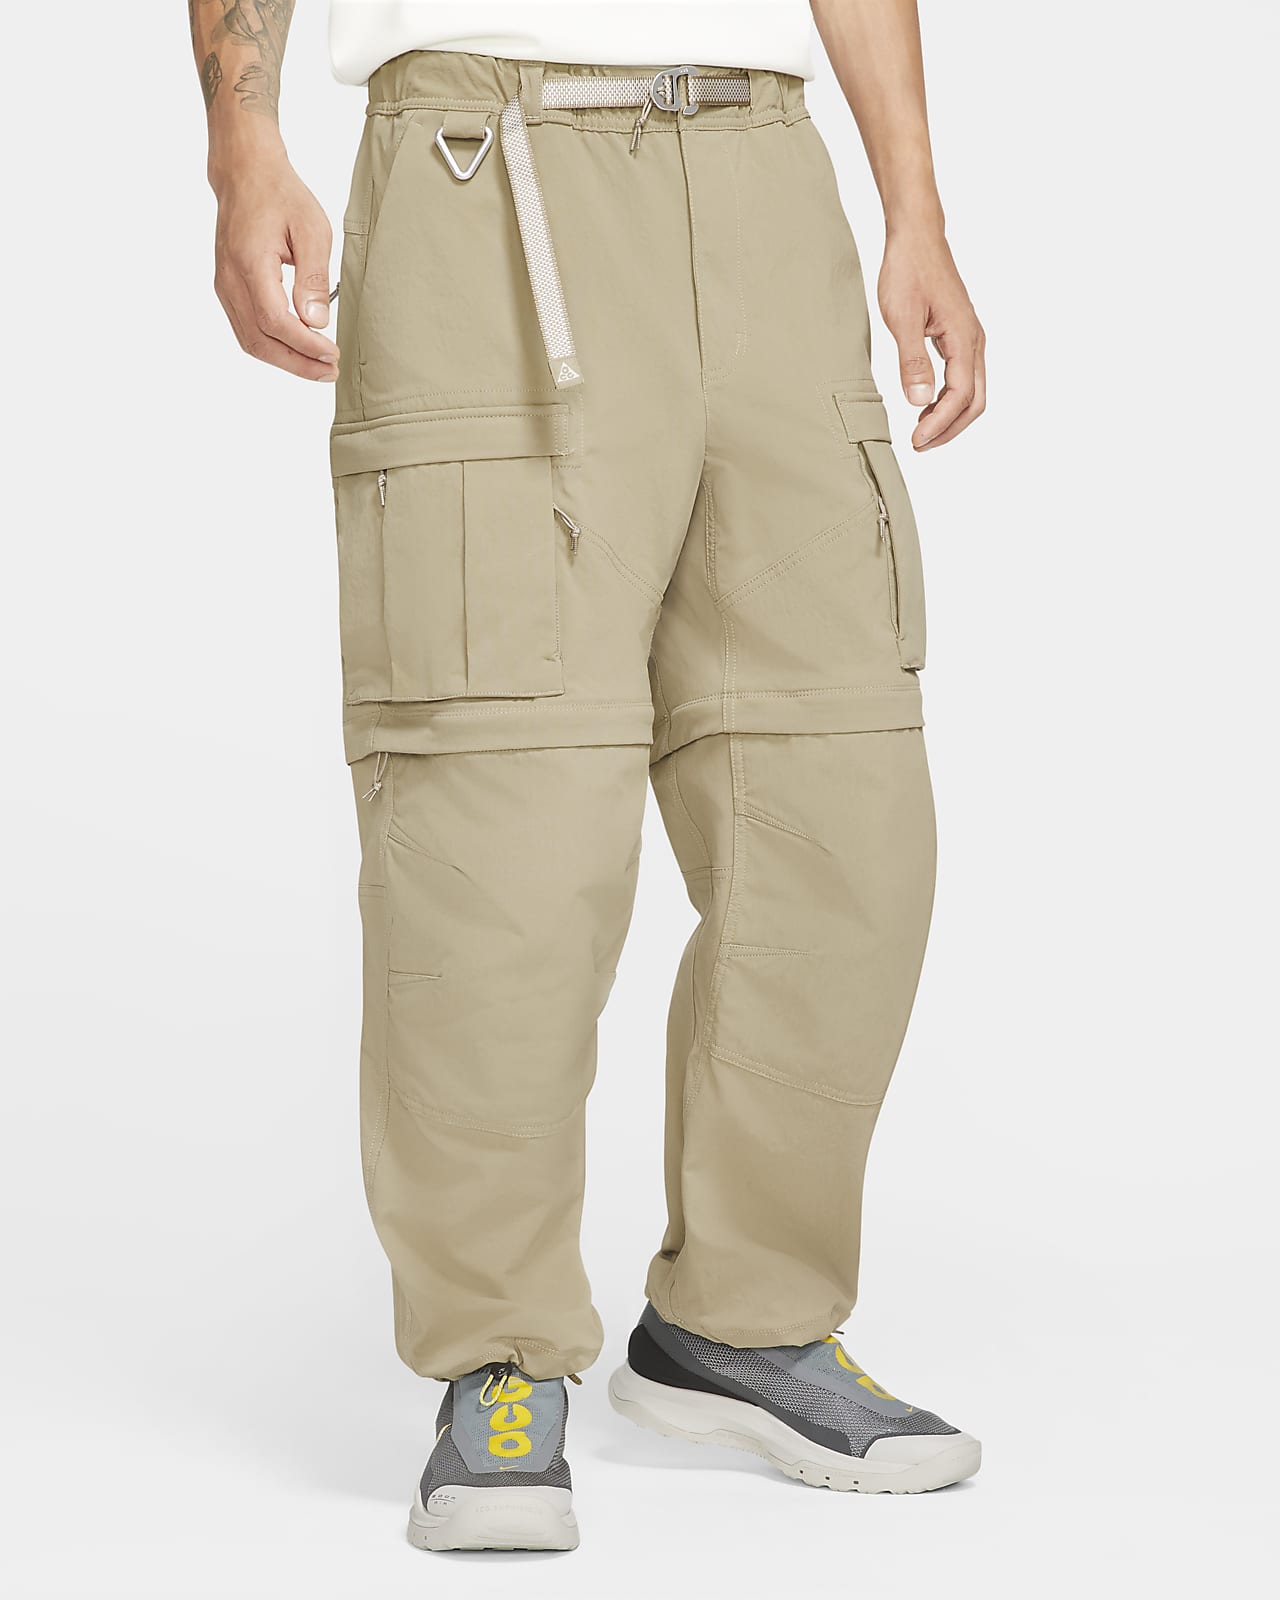 mens cargo trousers nike